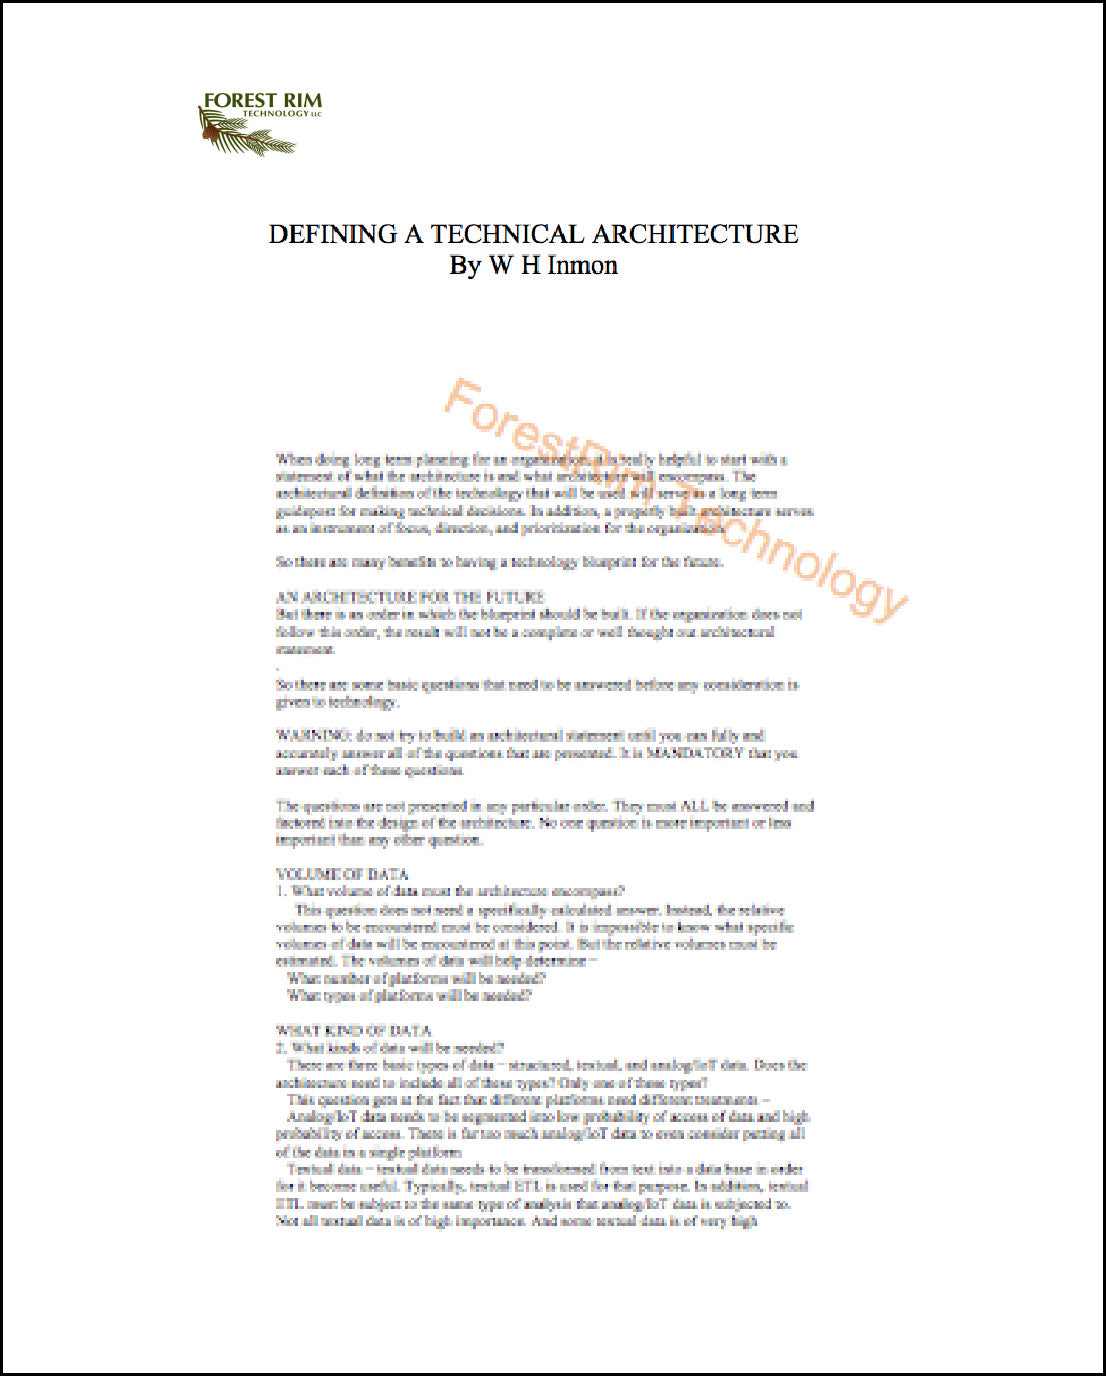 DEFINING A TECHNICAL ARCHITECTURE